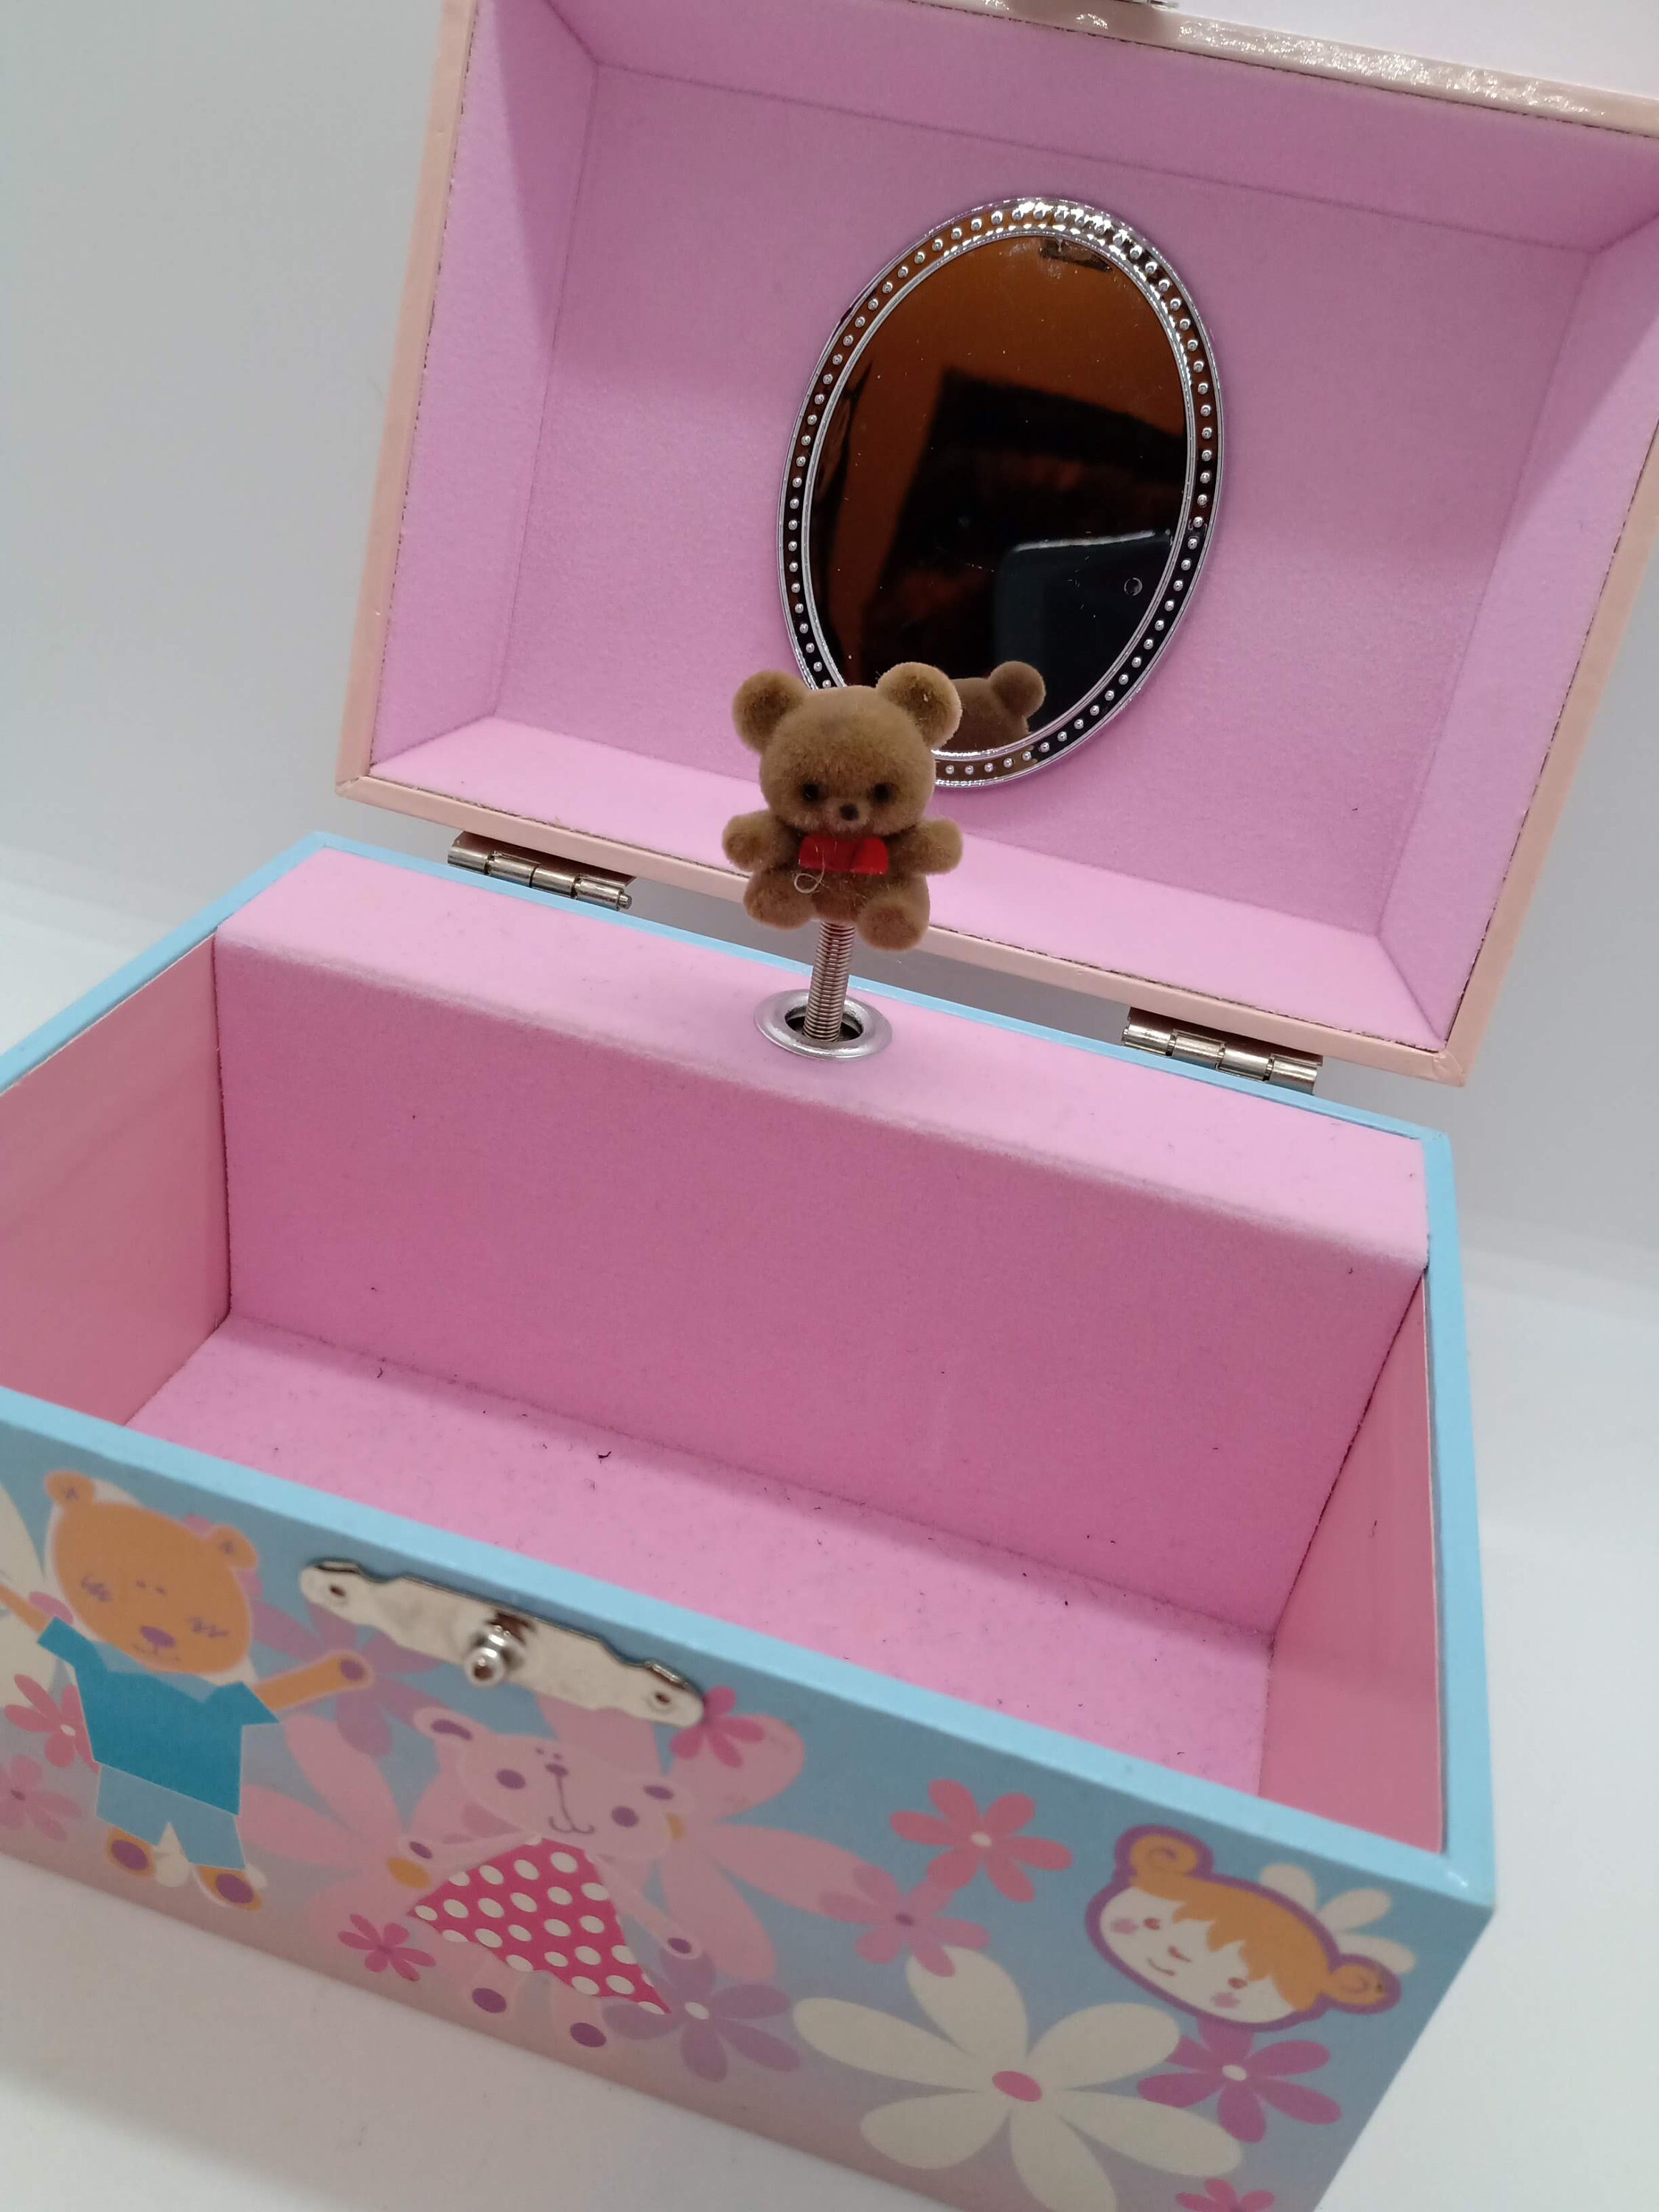 Vintage Kids Jewelry Box Jewelry Storage Jewelry Box Ballerina Shoes on Top  Pink Box With Storage Compartments 